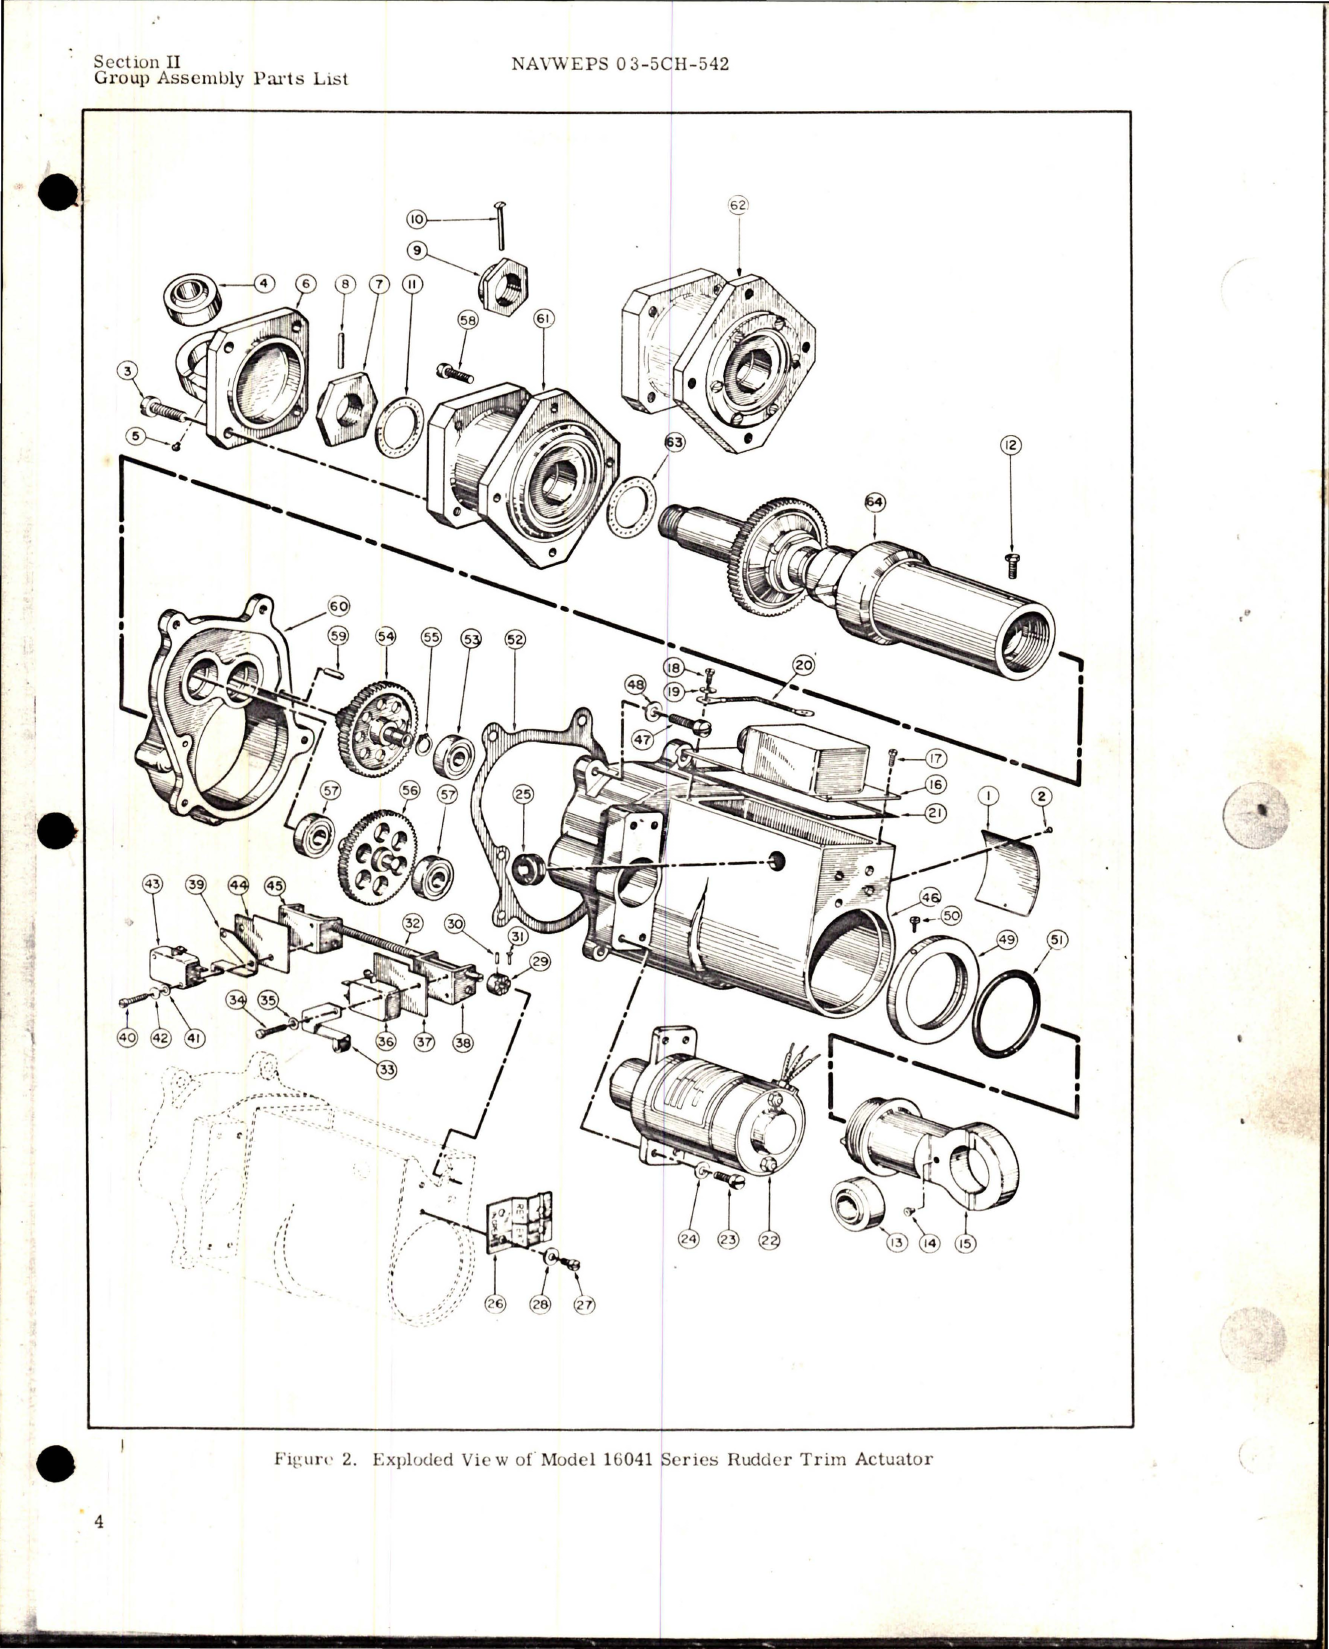 Sample page 9 from AirCorps Library document: Illustrated Parts Breakdown for Rudder Trim Actuator